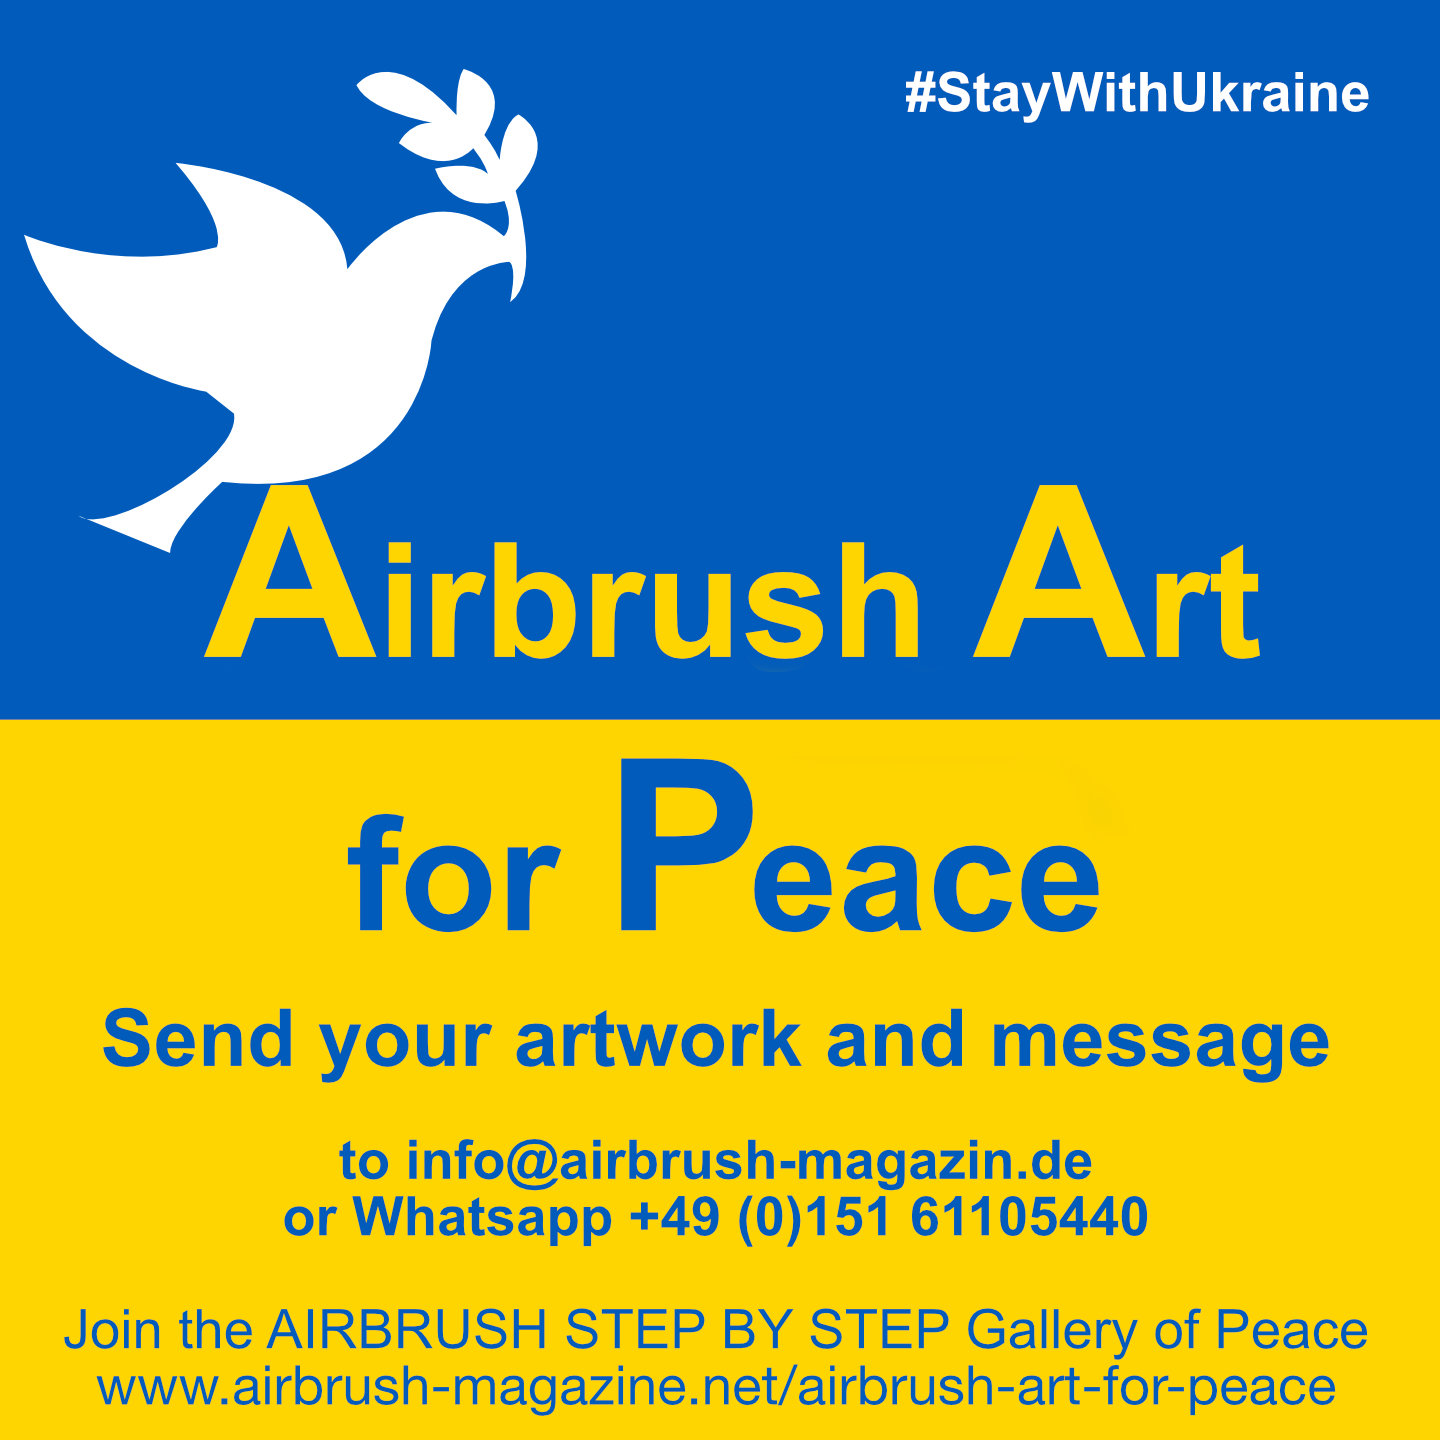 „Airbrush Art for Peace“ Solidarity campaign for Ukraine